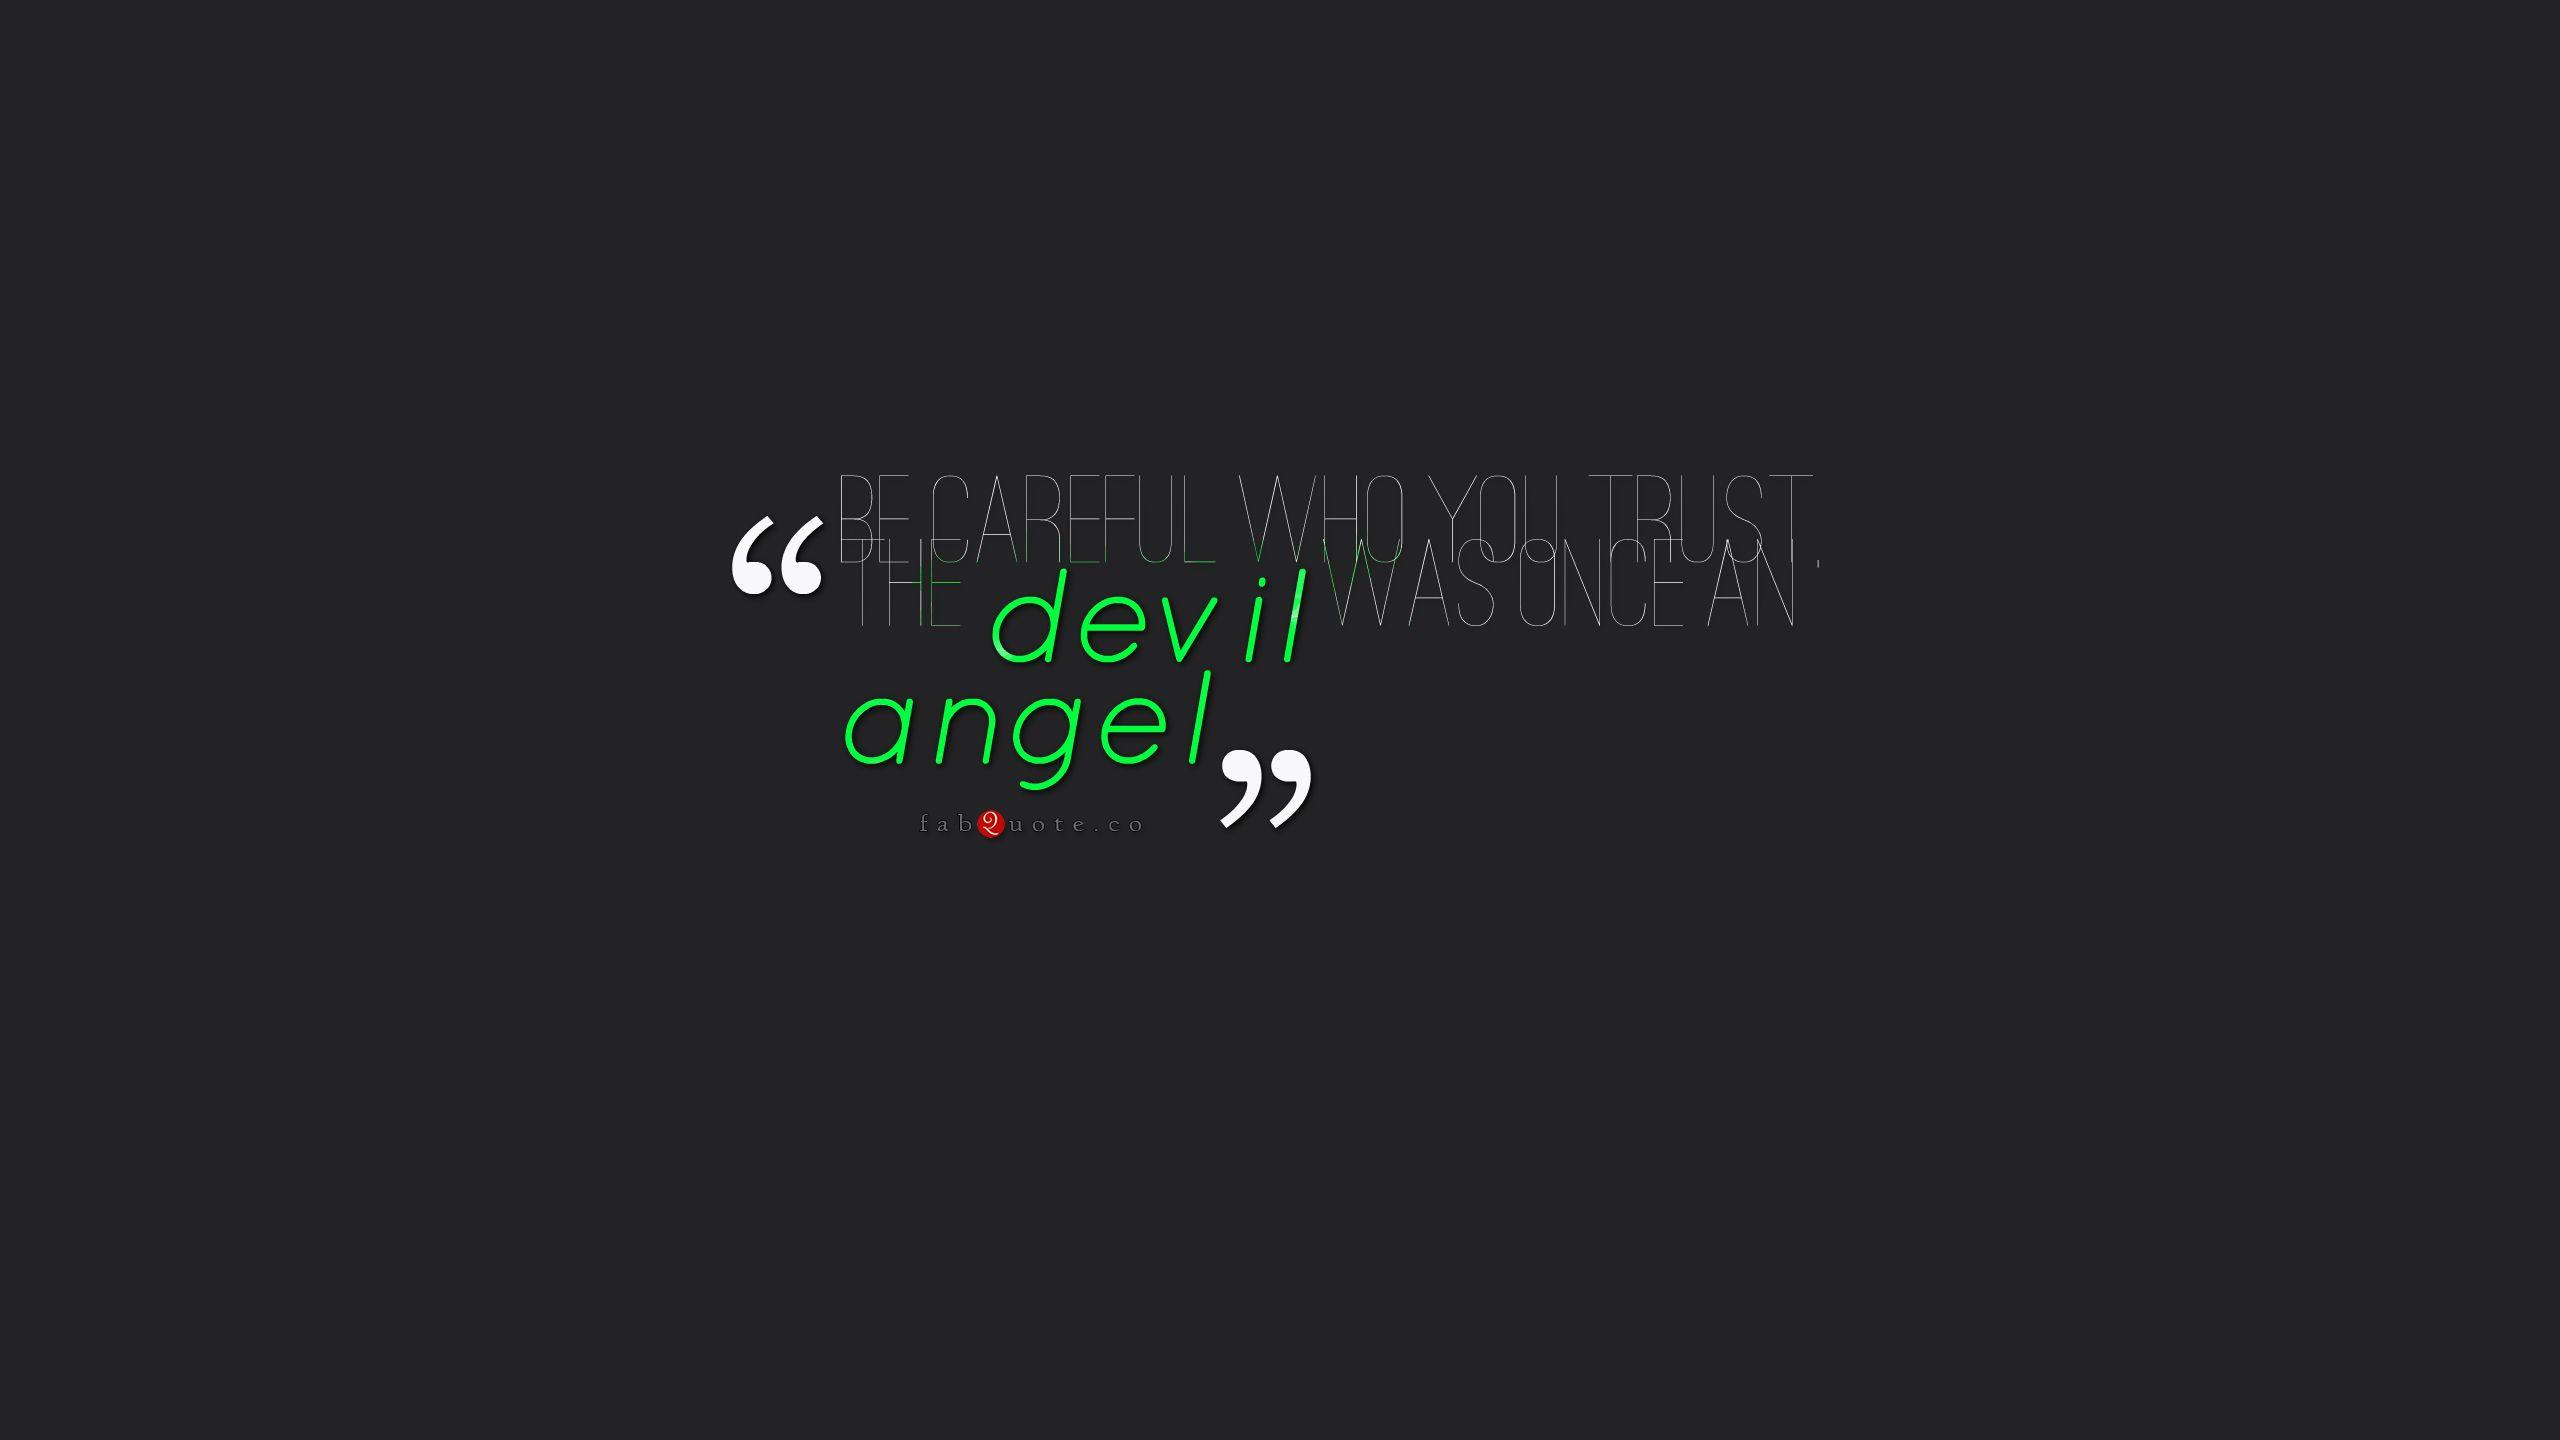 The Devil was Once an Angel Quote widescreen wallpaper. Wide